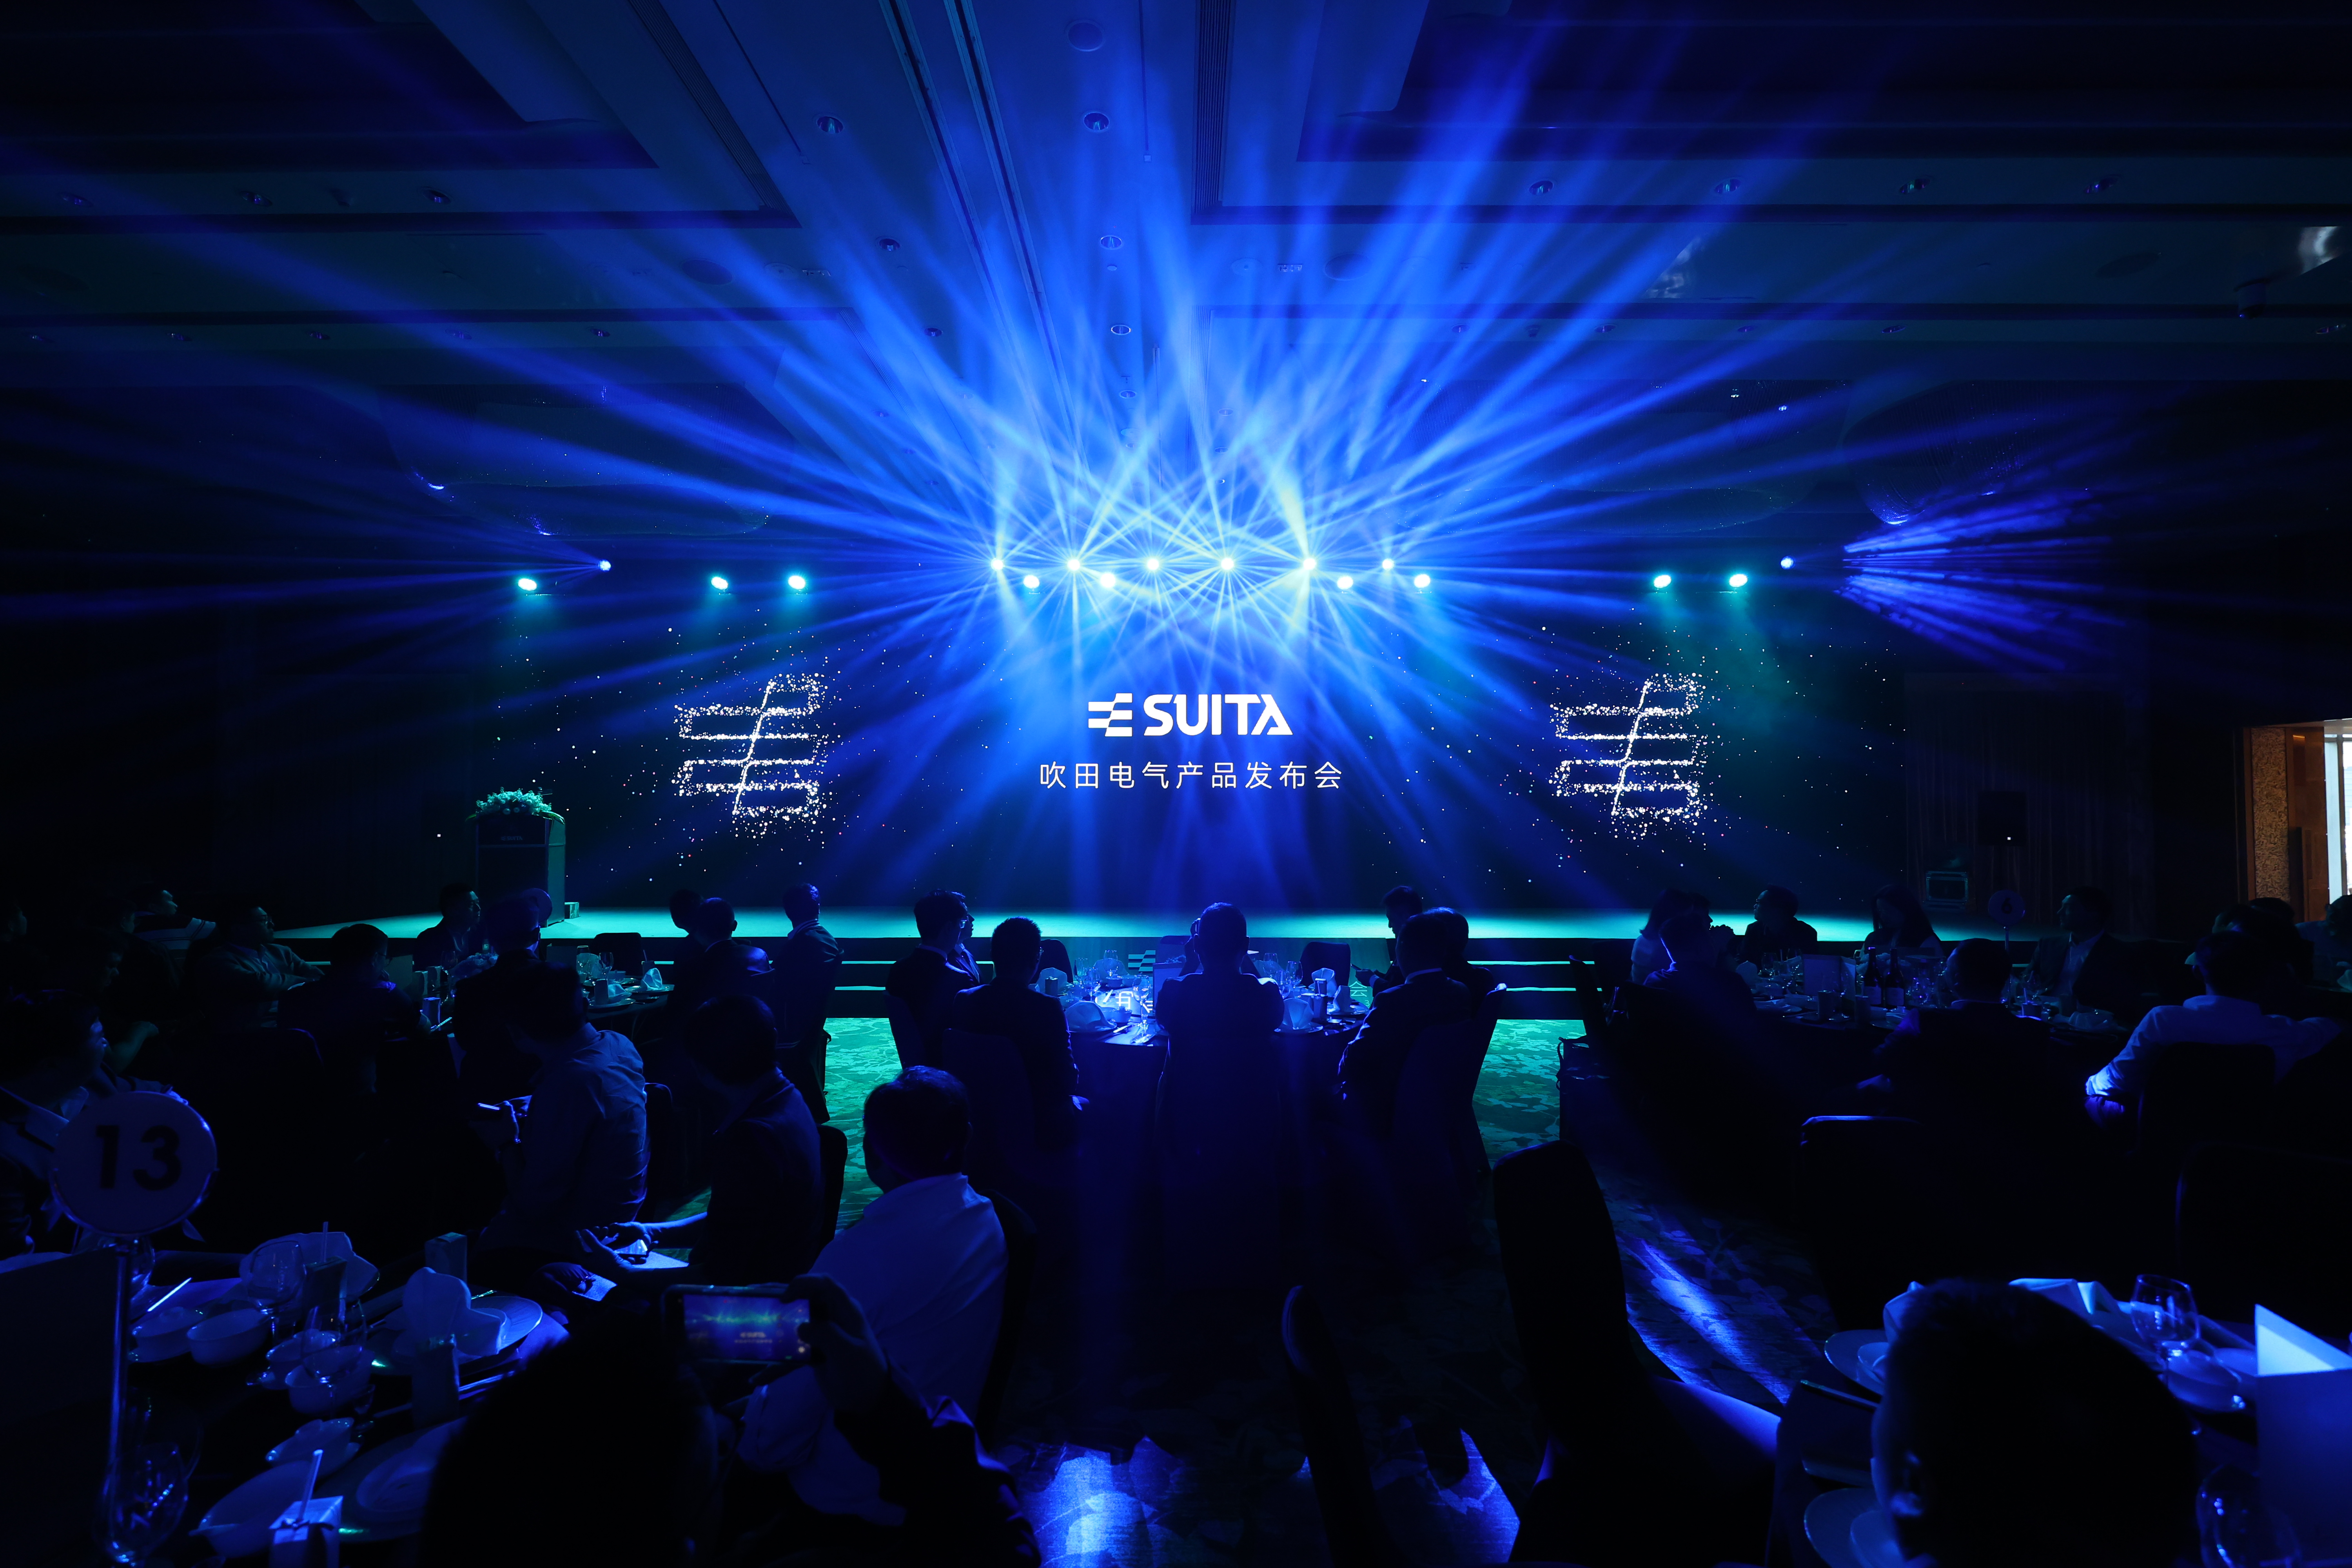 The product launch event of Suita Electric was successfully held